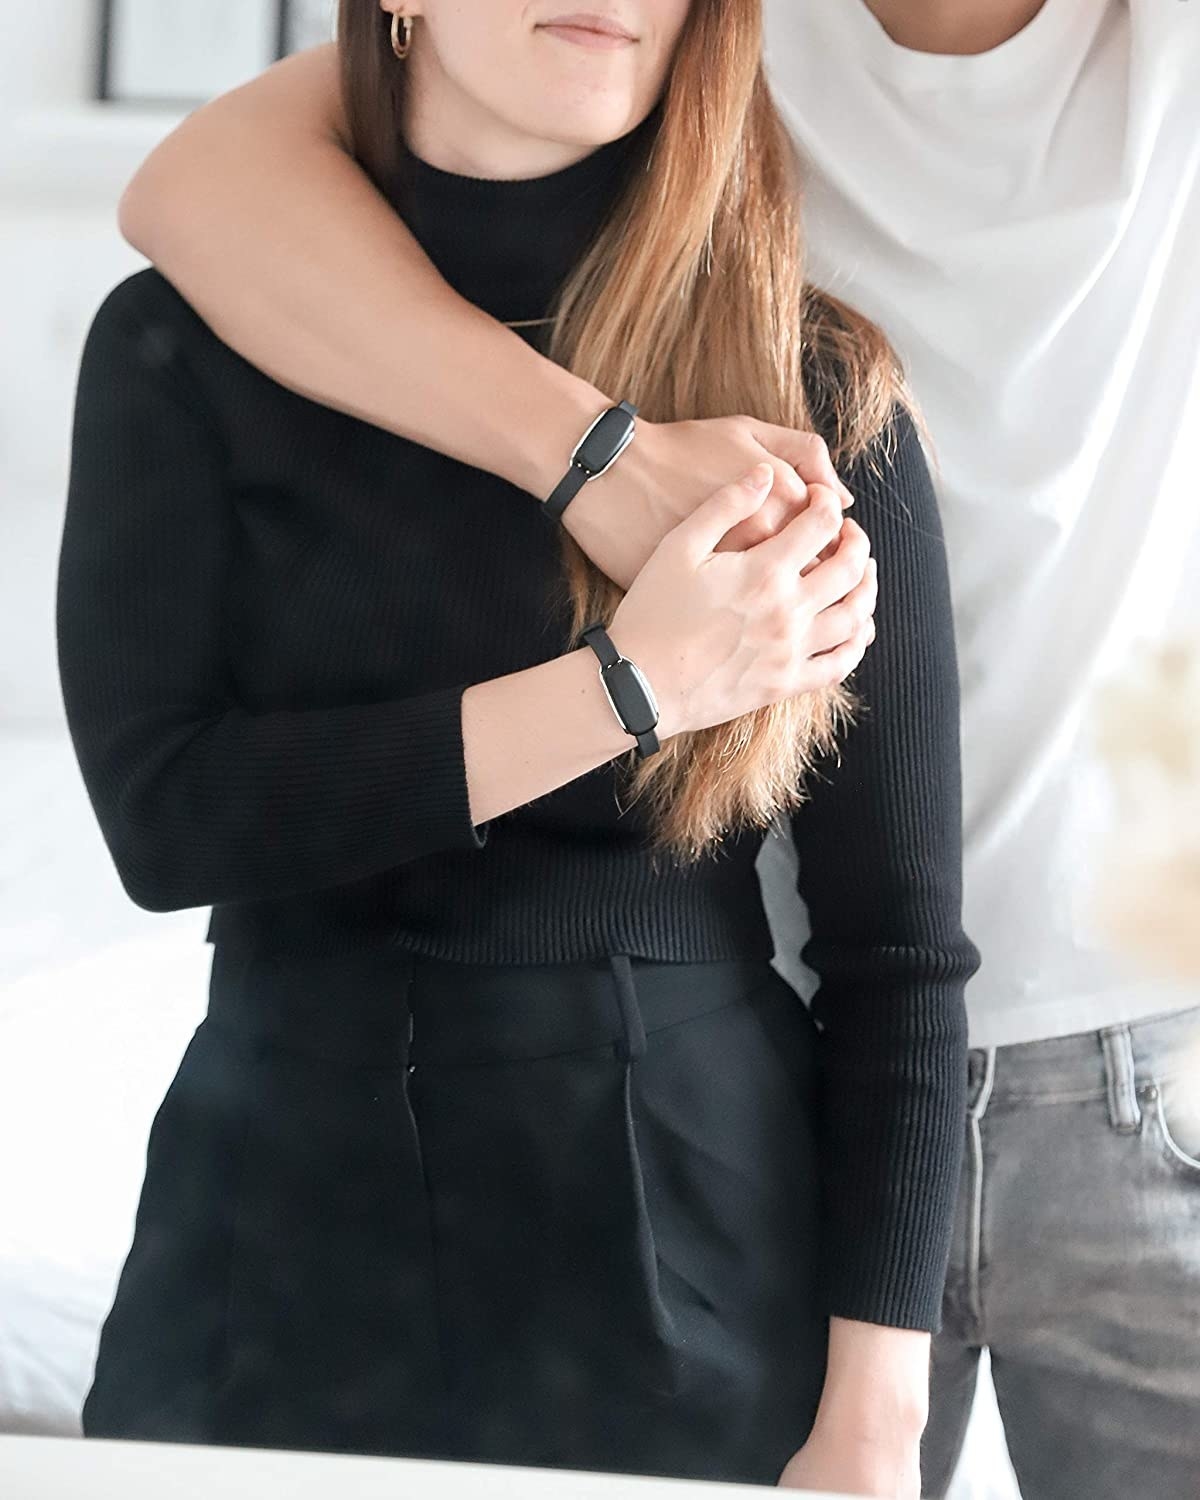 Two models wearing the black bracelets and holding hands